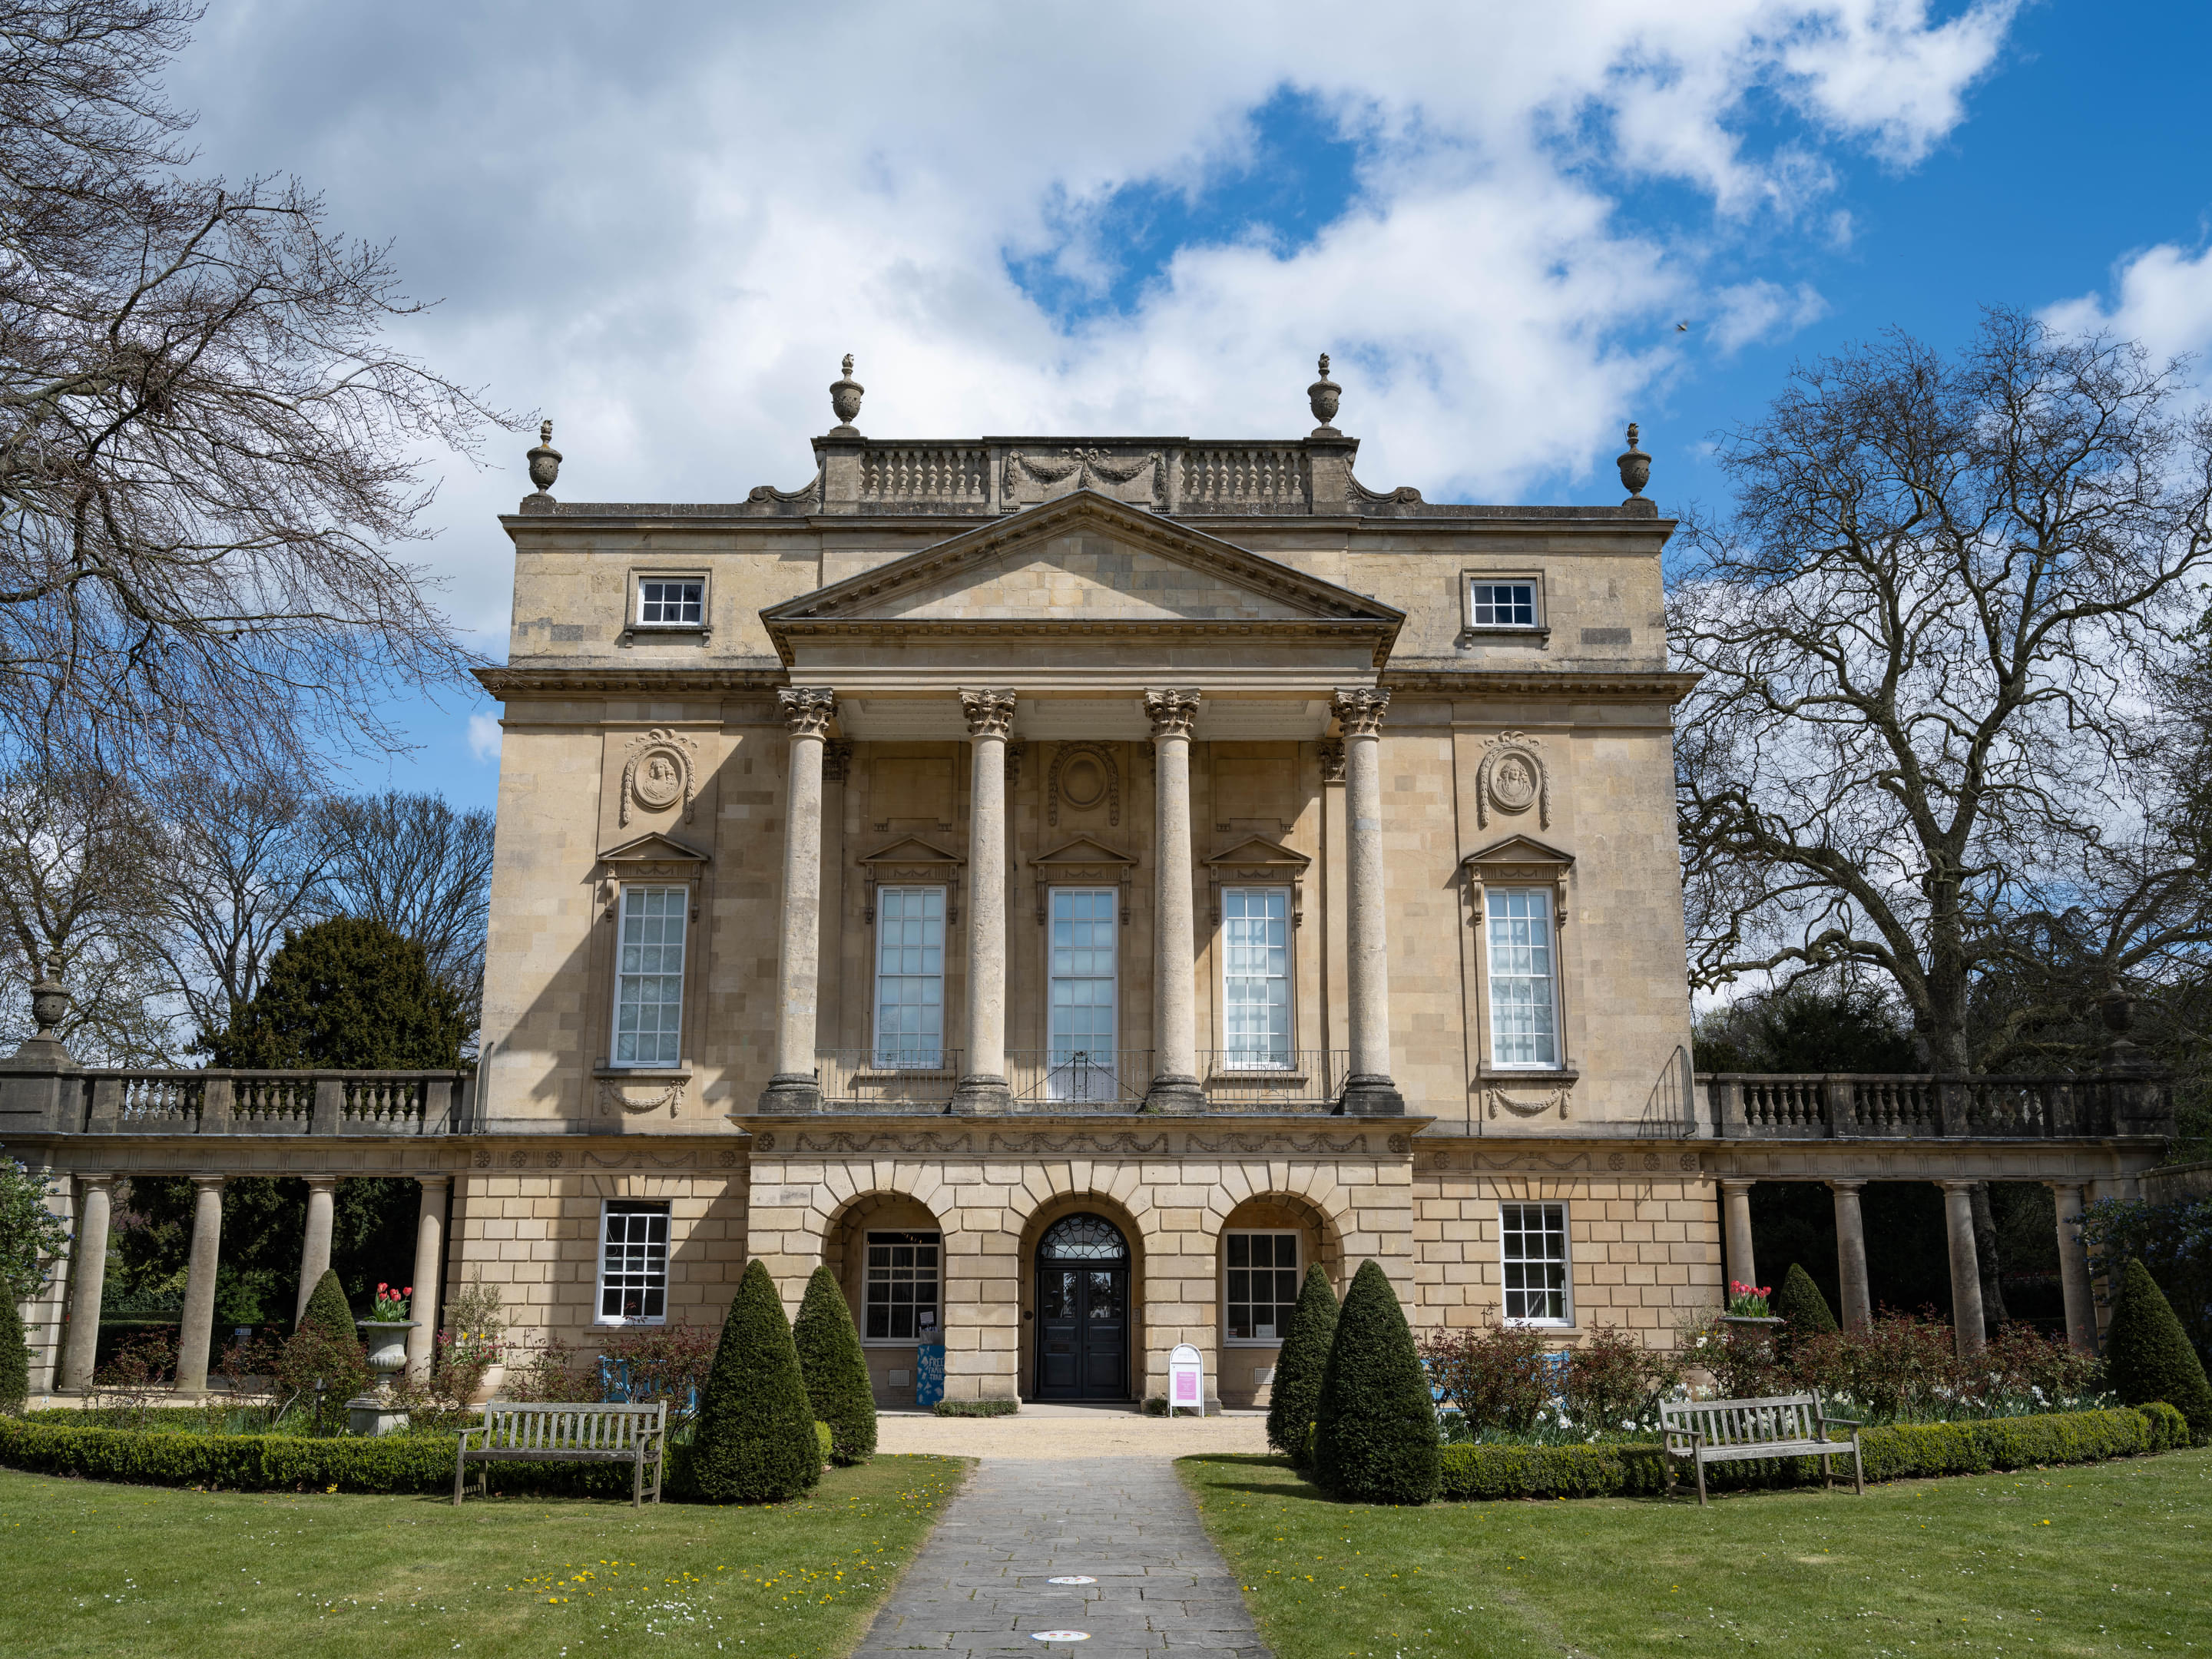 Holburne Museum Overview